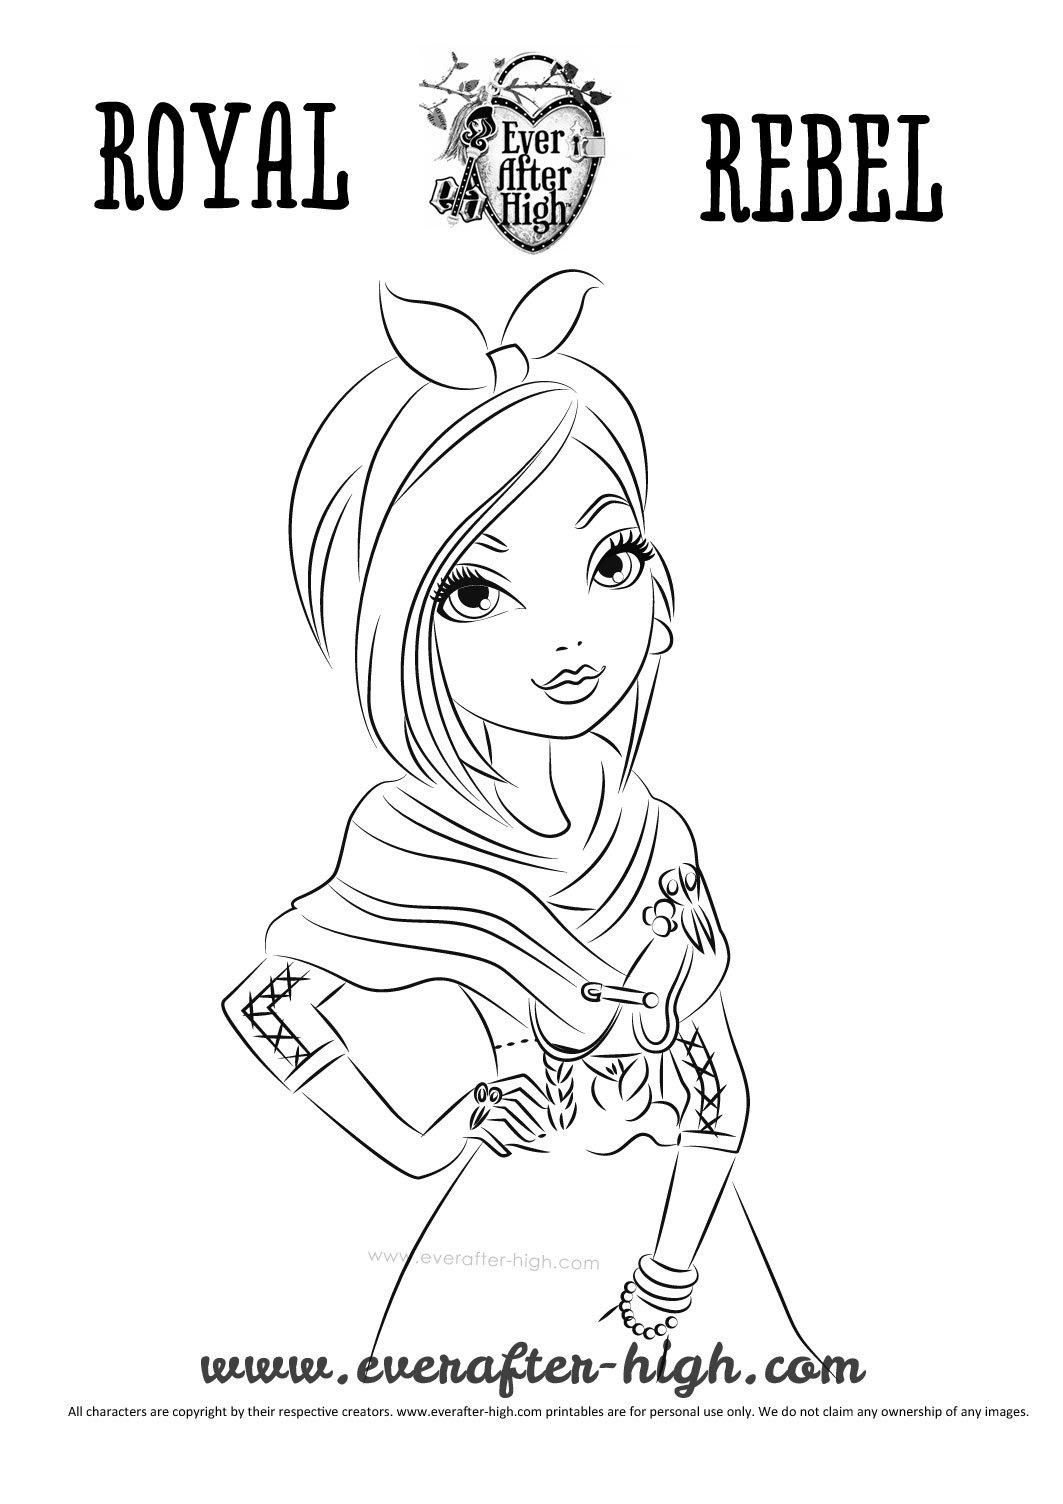 Poppy O'Hair coloring page | Ever After High